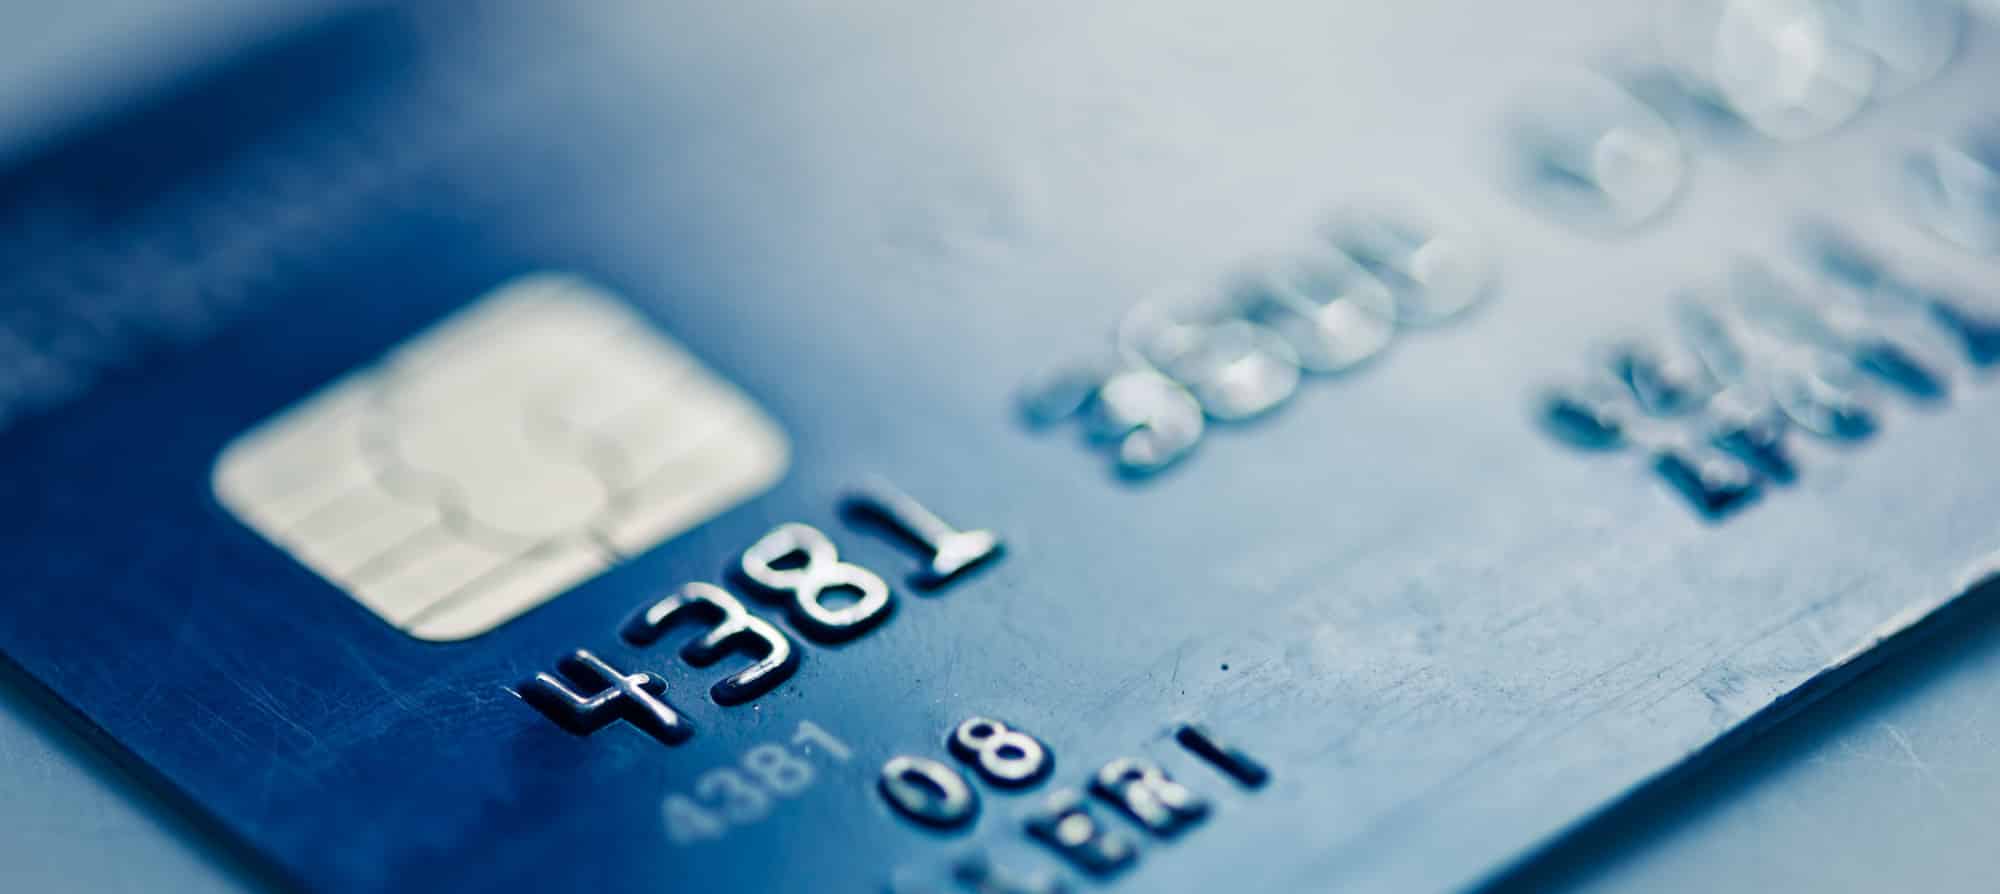 5 Things to Consider When Choosing a Corporate Credit Card